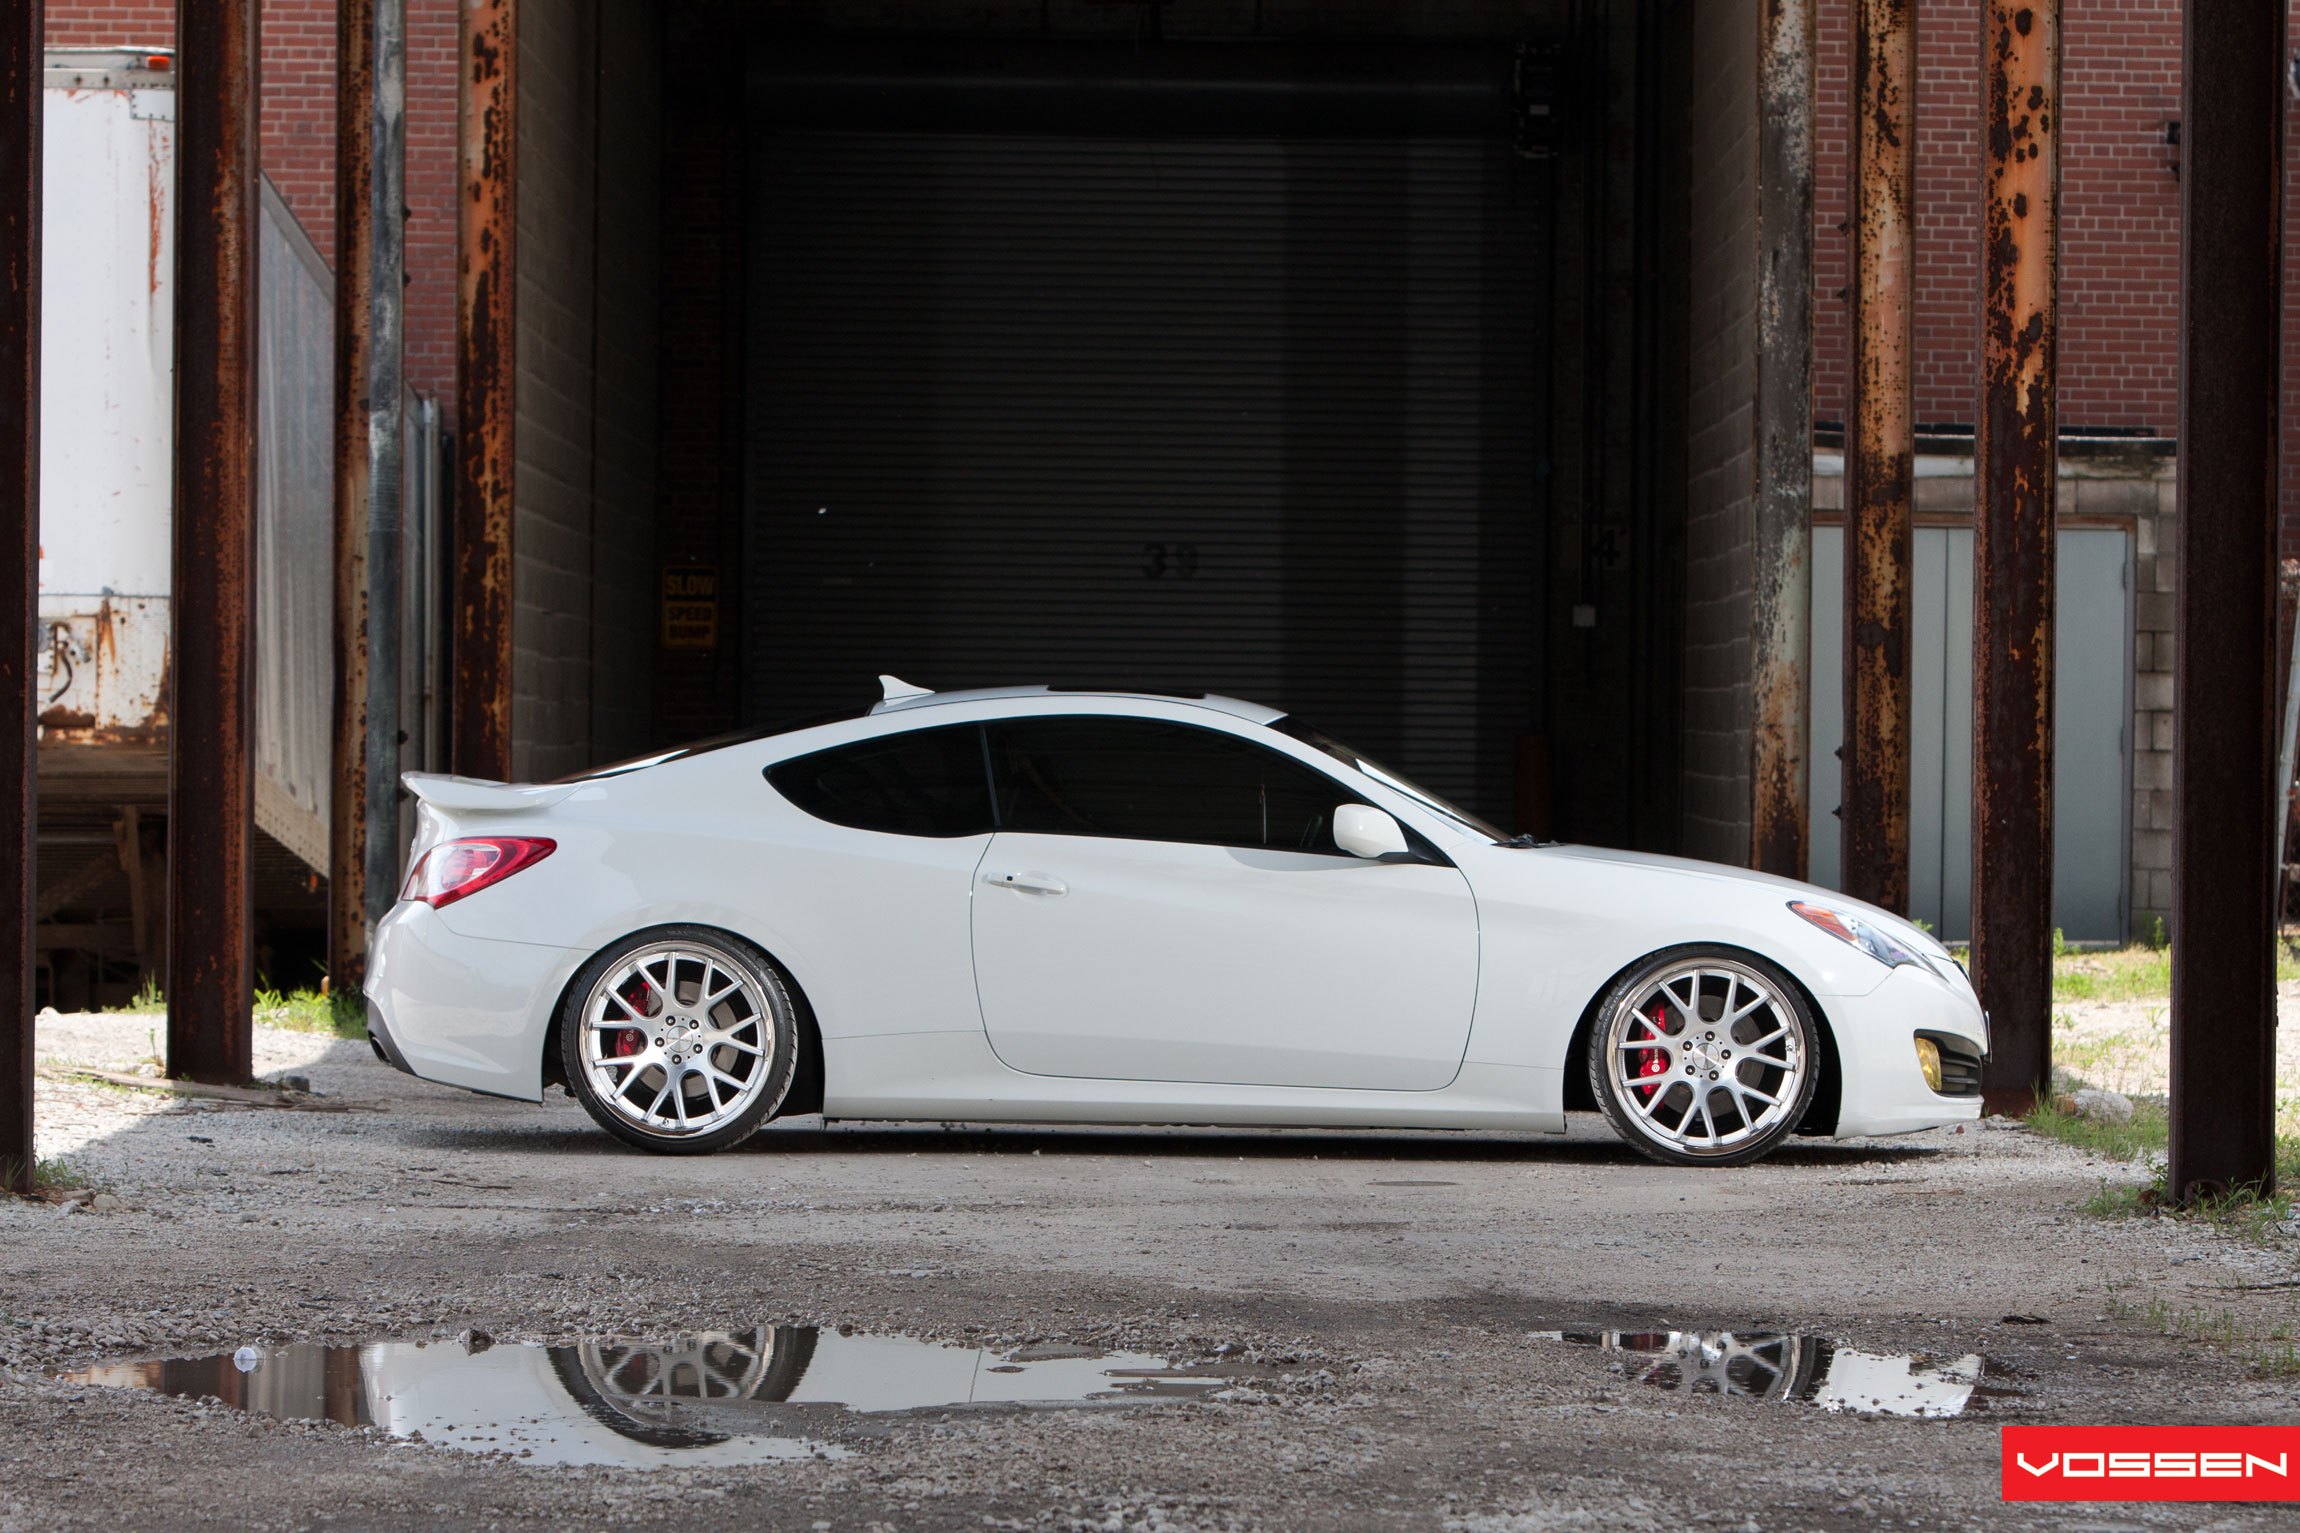 Vossen Rims with Red Brembo Brakes on Hyundai Genesis Coupe - Photo by Vossen